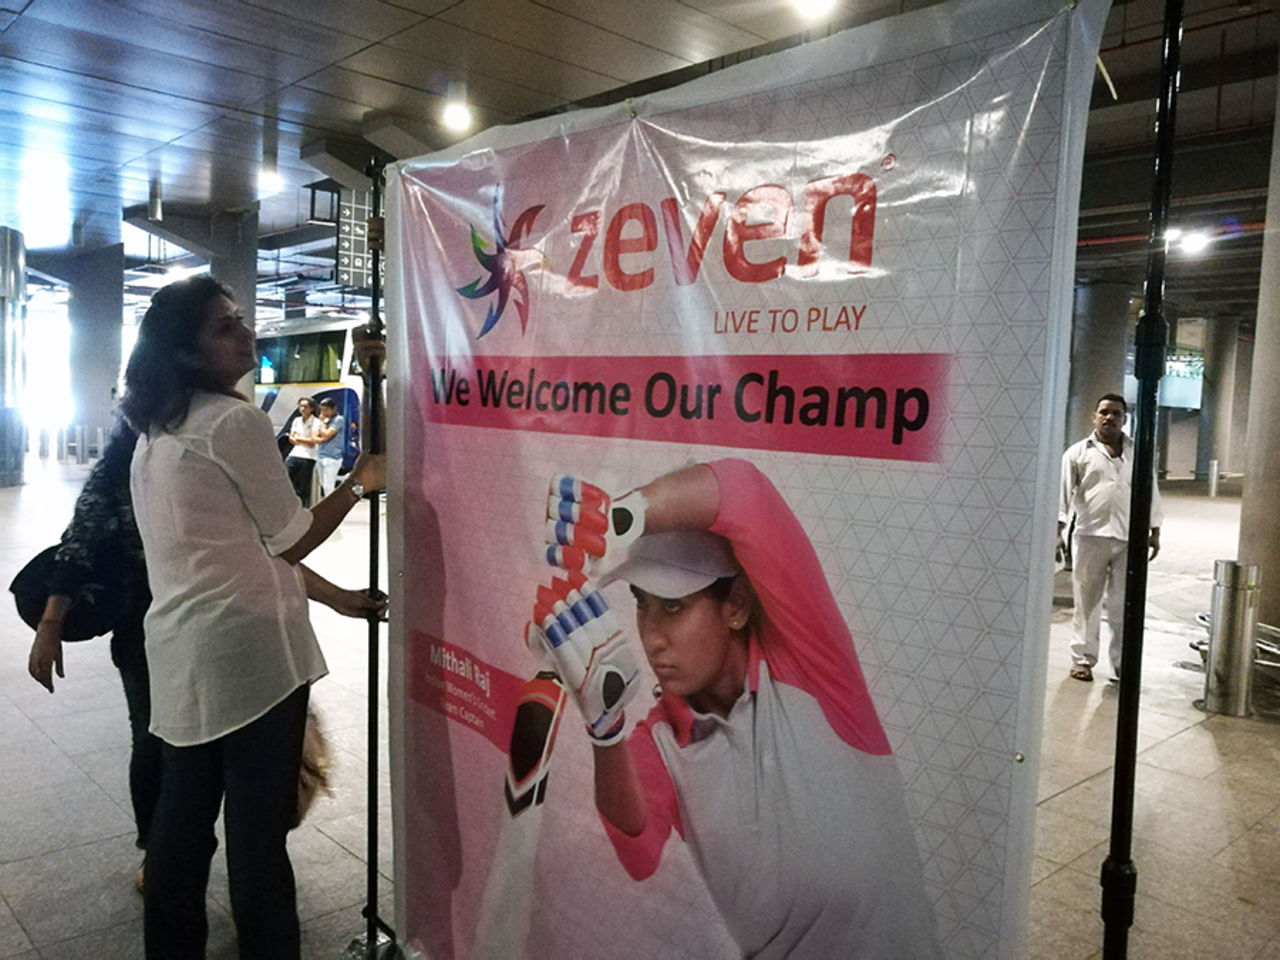 A sponsor's banner at the airport greets the women's team, Mumbai, July 26 2017